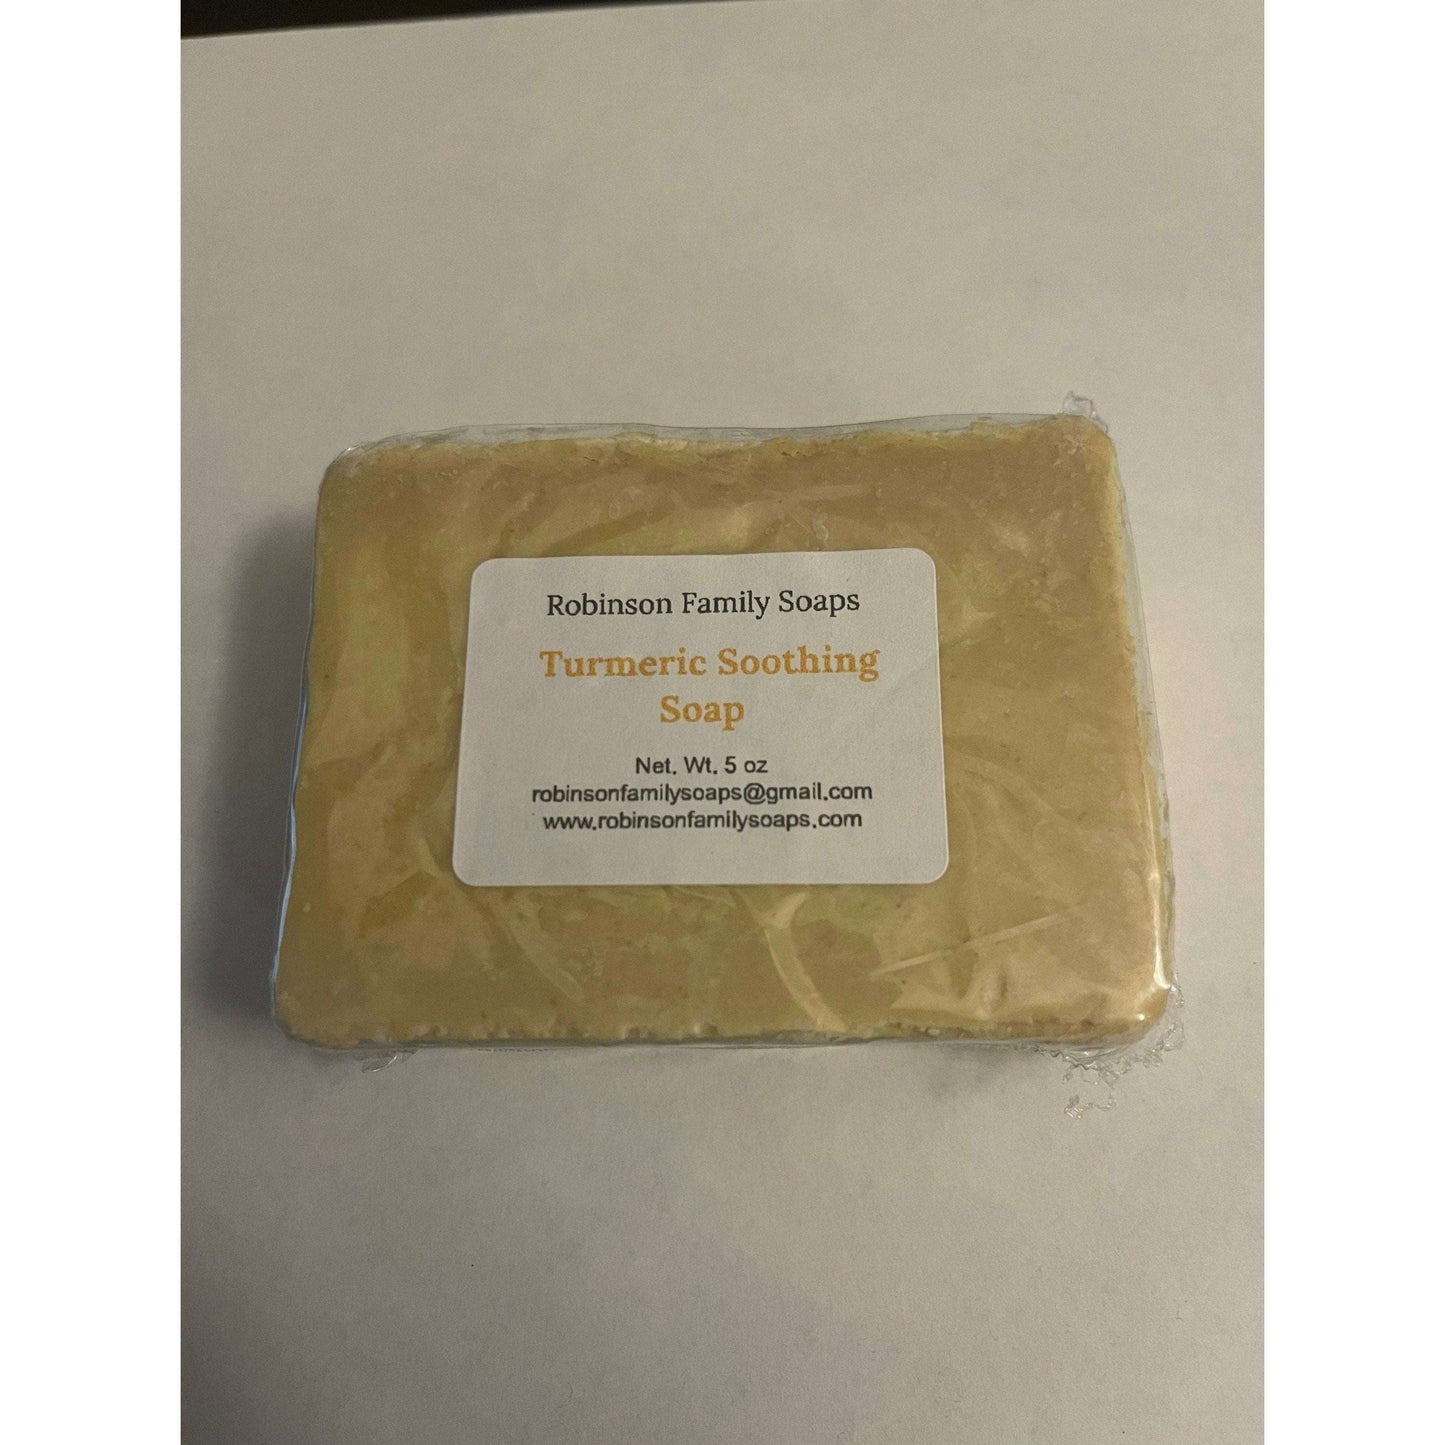 Turmeric Soothing Soap for Sensitive Skin & Skin Aliments Bar Soap Robinson Family Soaps   